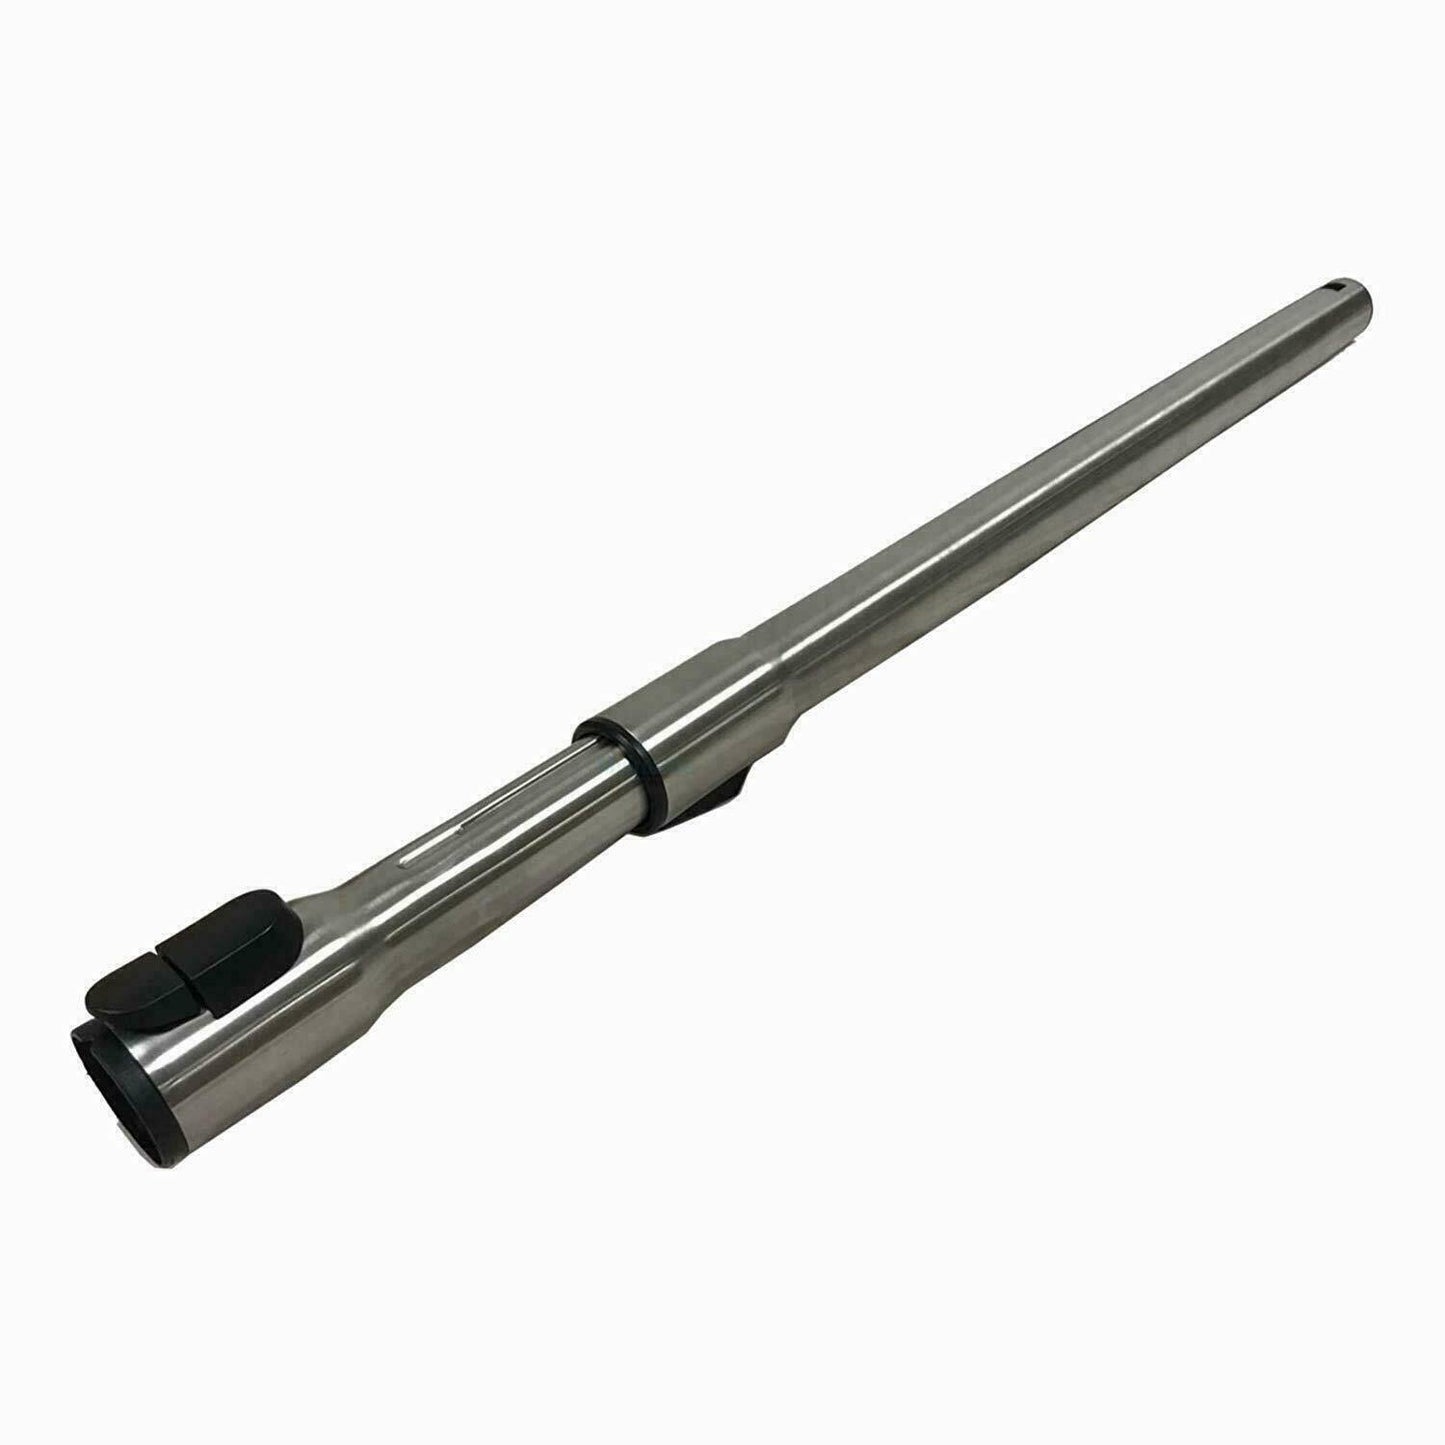 Telescopic Extension Tube Pipe Rod For Miele S382 S378 S374 S373 S372 S370 S356I Sparesbarn